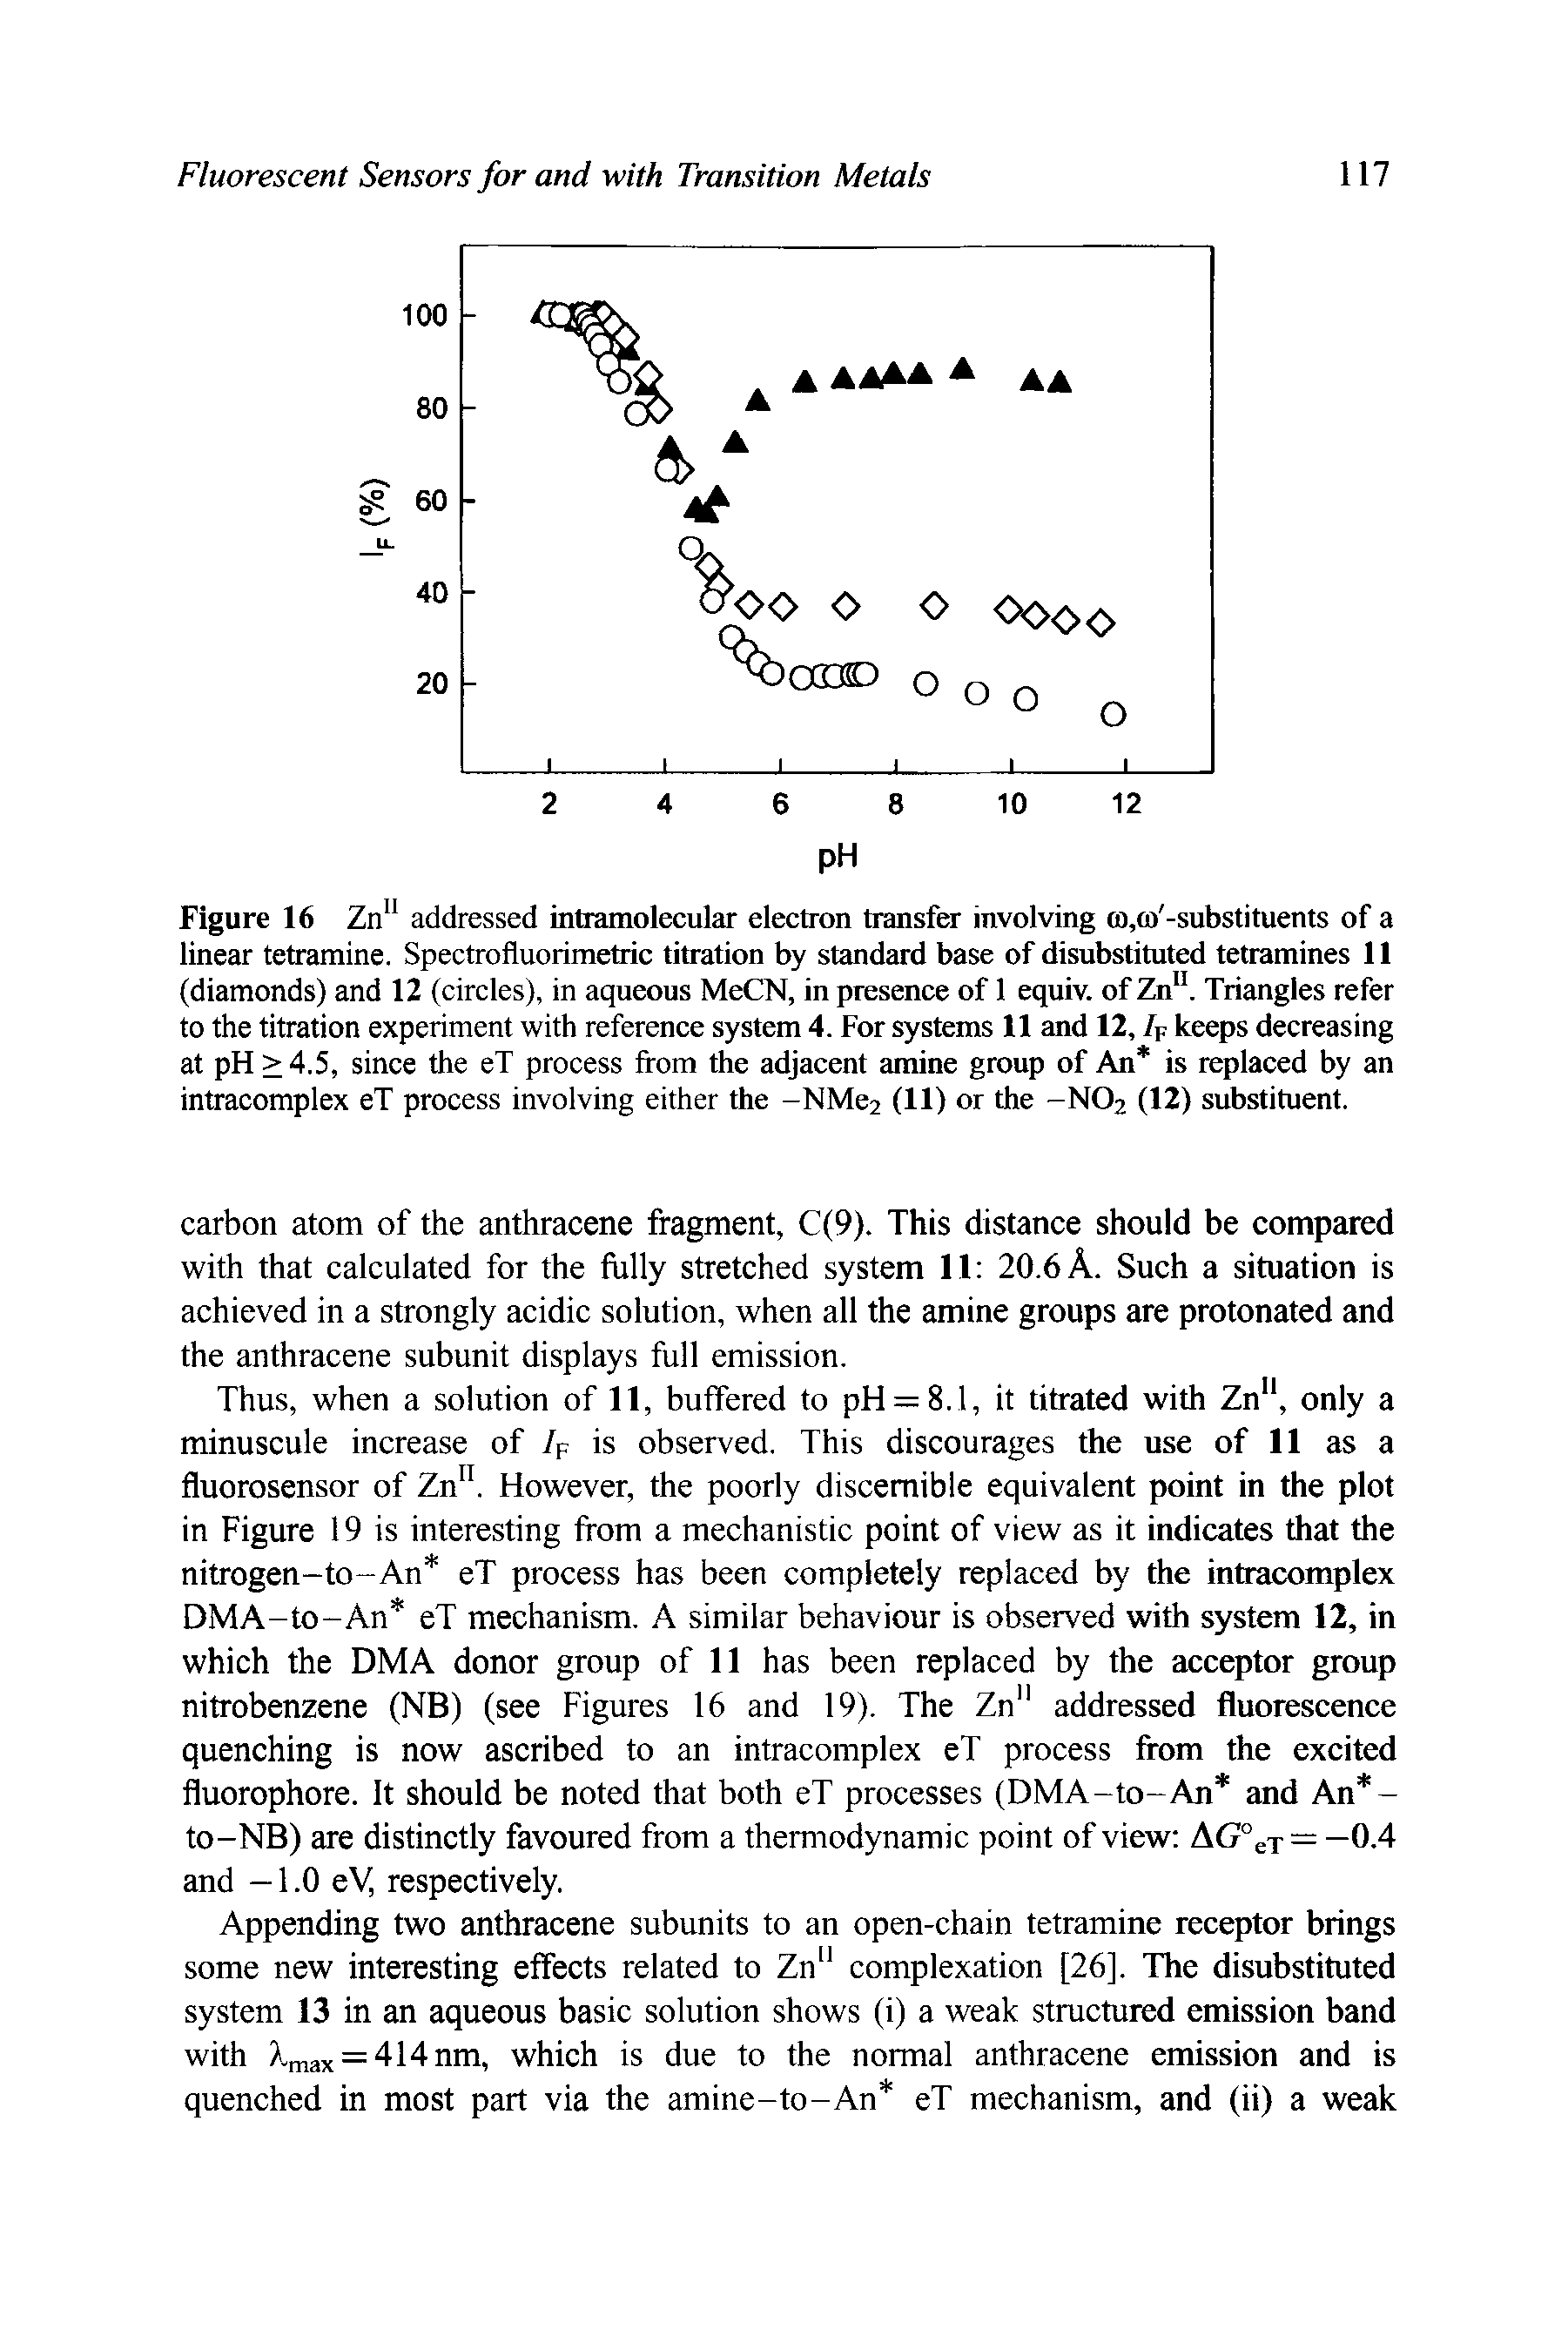 Figure 16 Zn" addressed intramolecular electron transfer involving (n,Q) -substituents of a linear tetramine. Spectrofluorimetric titration by standard base of disubstituted tetramines 11 (diamonds) and 12 (circles), in aqueous MeCN, in presence of 1 equiv. of Zn . Triangles refer to the titration experiment with reference system 4. For systems 11 and 12, /p keeps decreasing at pH >4.5, since the eT process from the adjacent amine group of An is replaced by an intracomplex eT process involving either the -NMc2 (11) or the -NO2 (12) substituent.